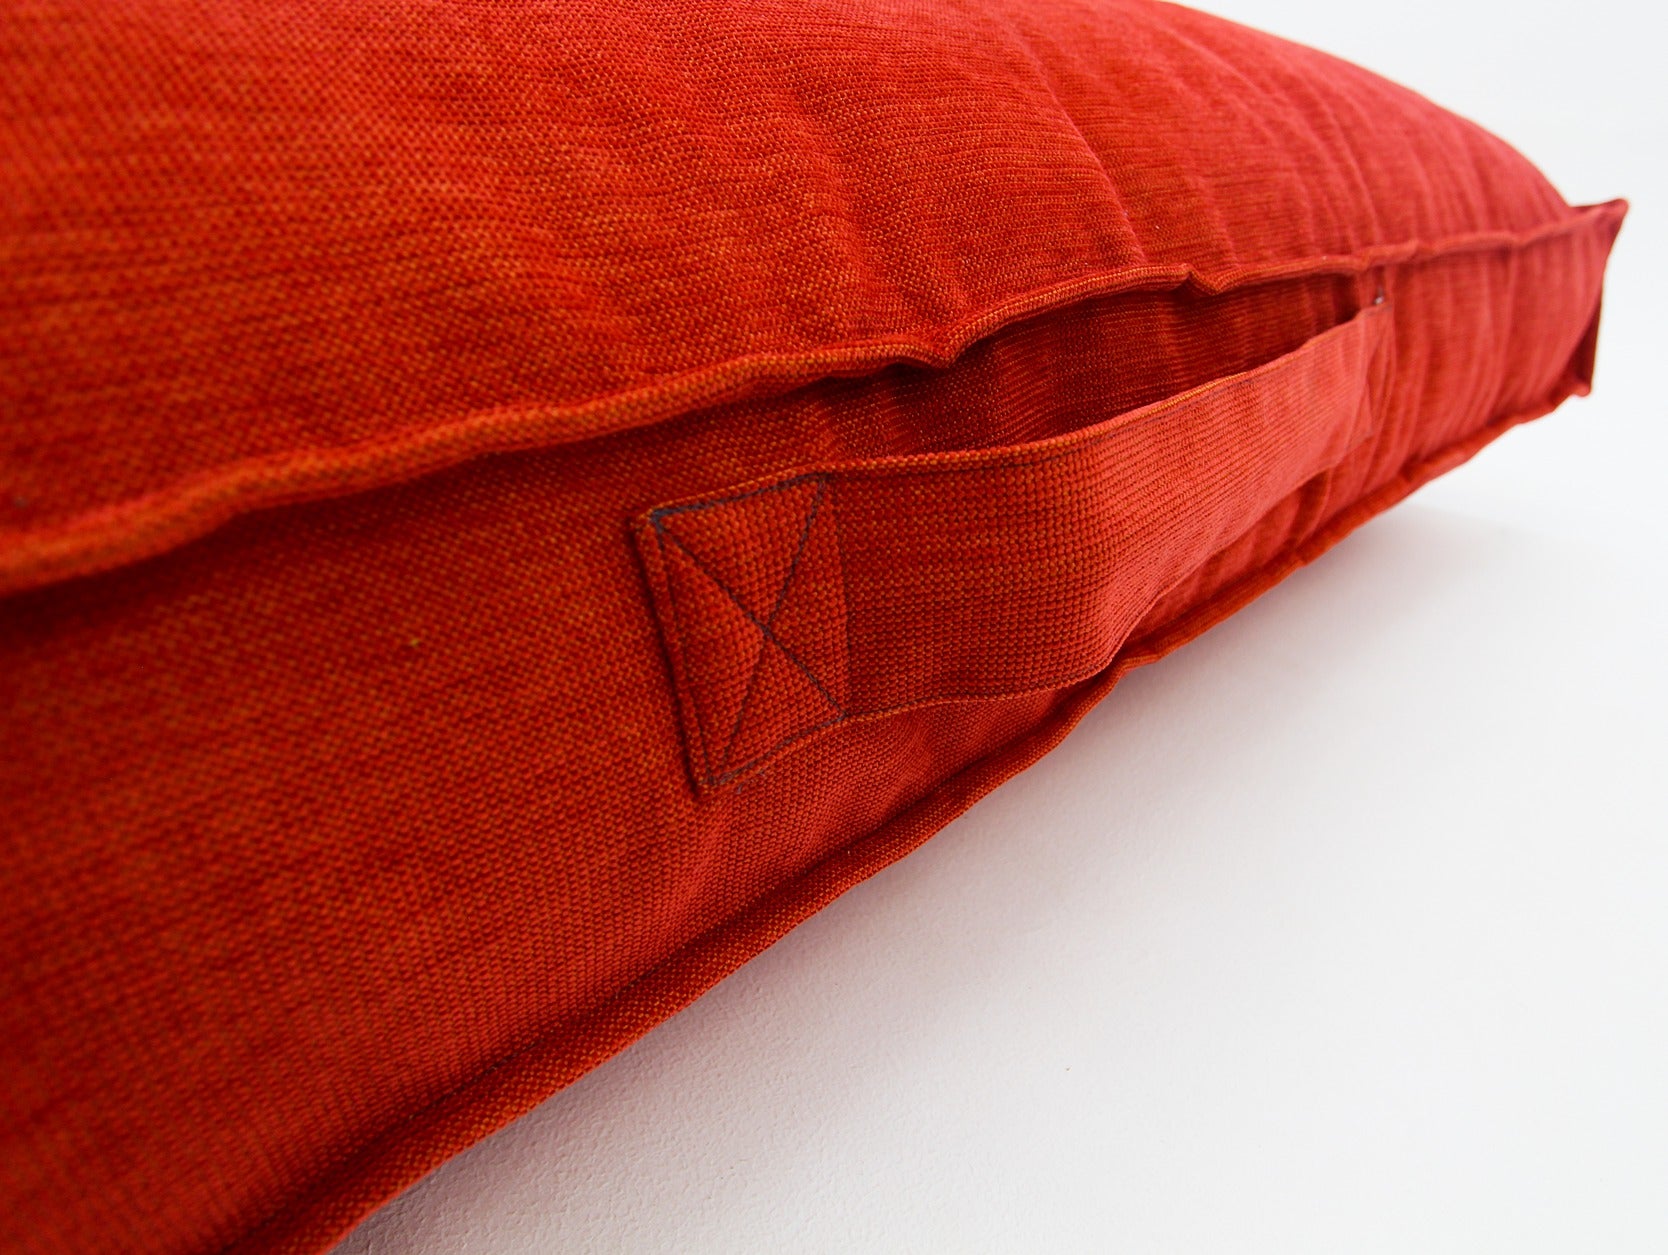 L Dog Bed Red Extra Cover